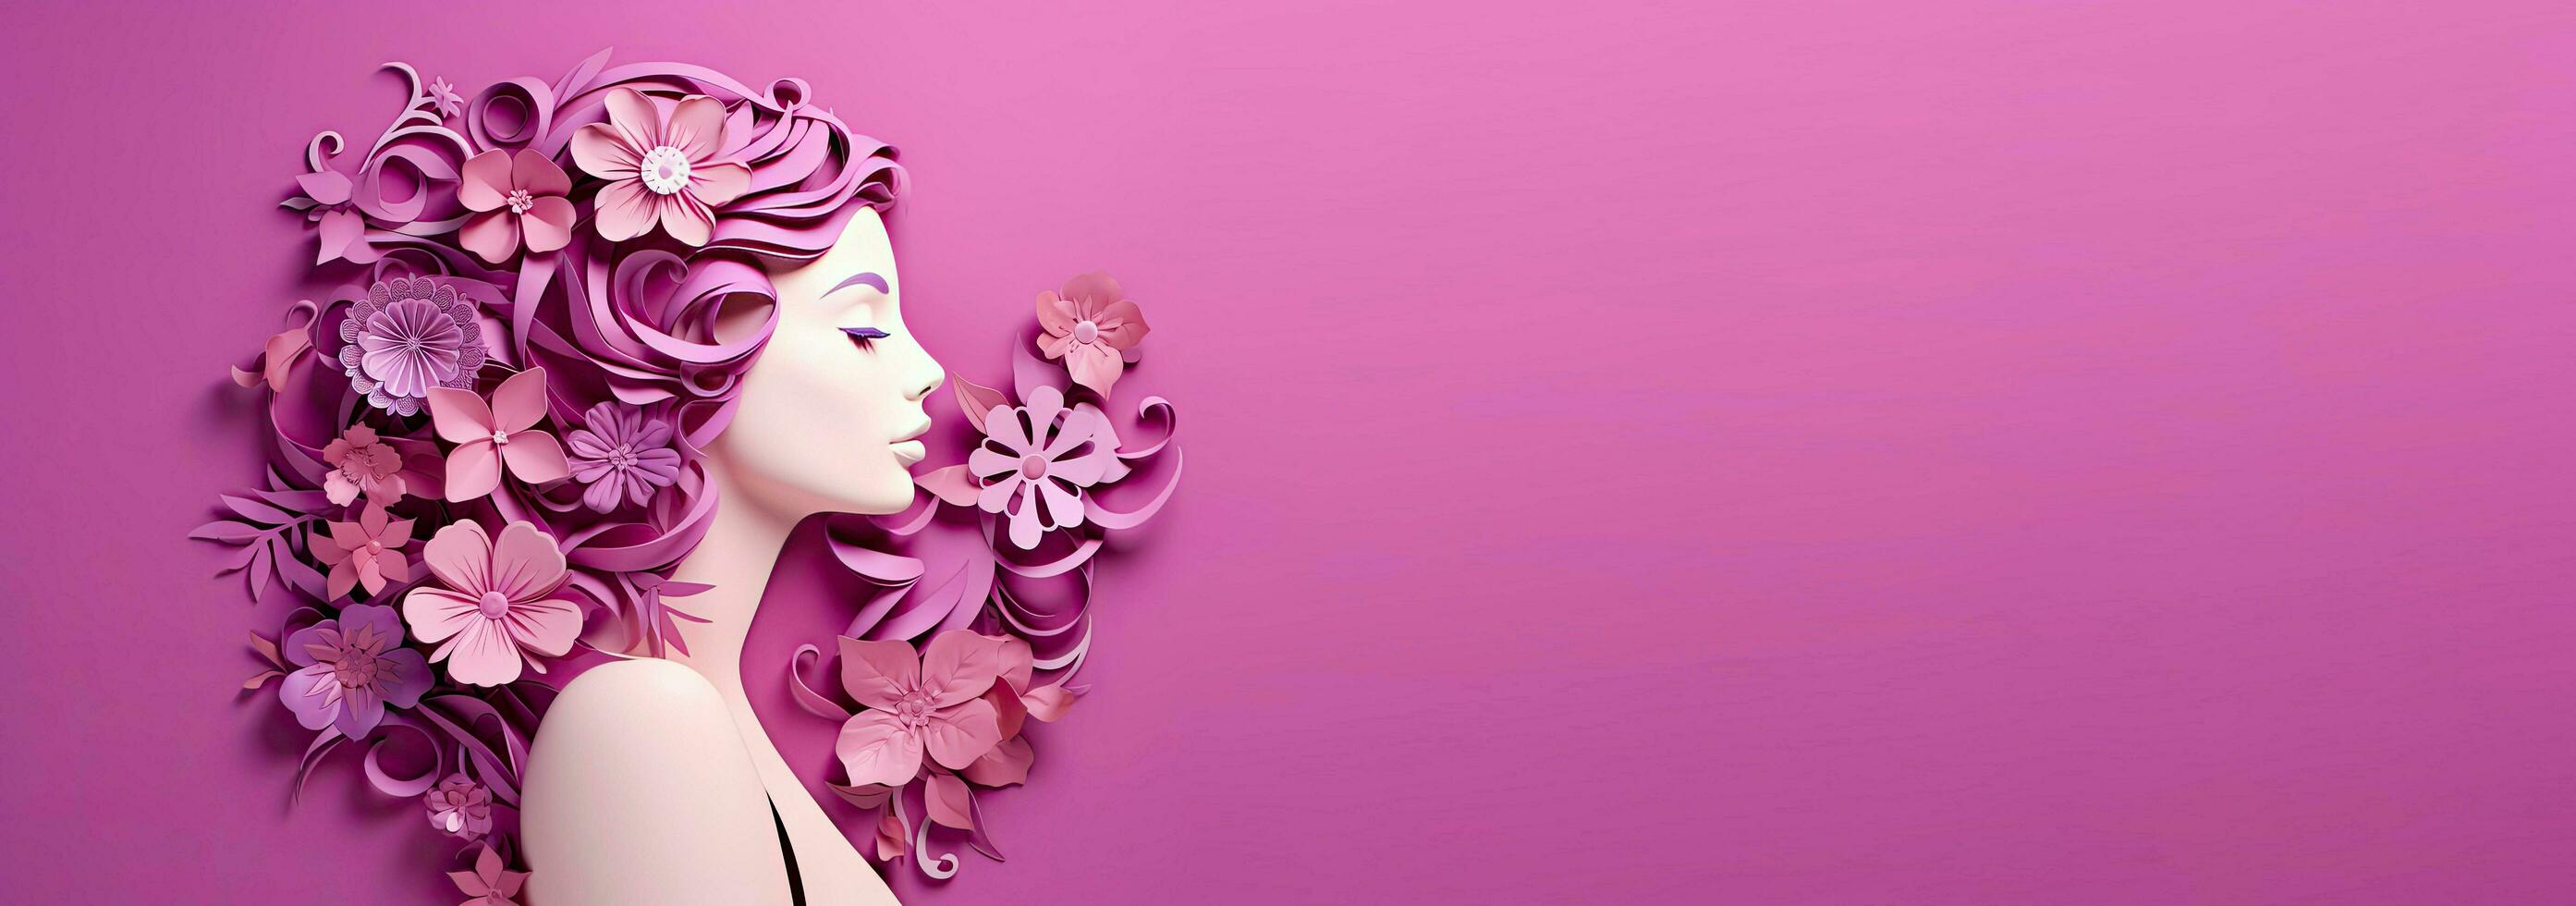 AI generated Paper art pretty women's faces in honor of international women's day on march 8th, with free copy space. photo